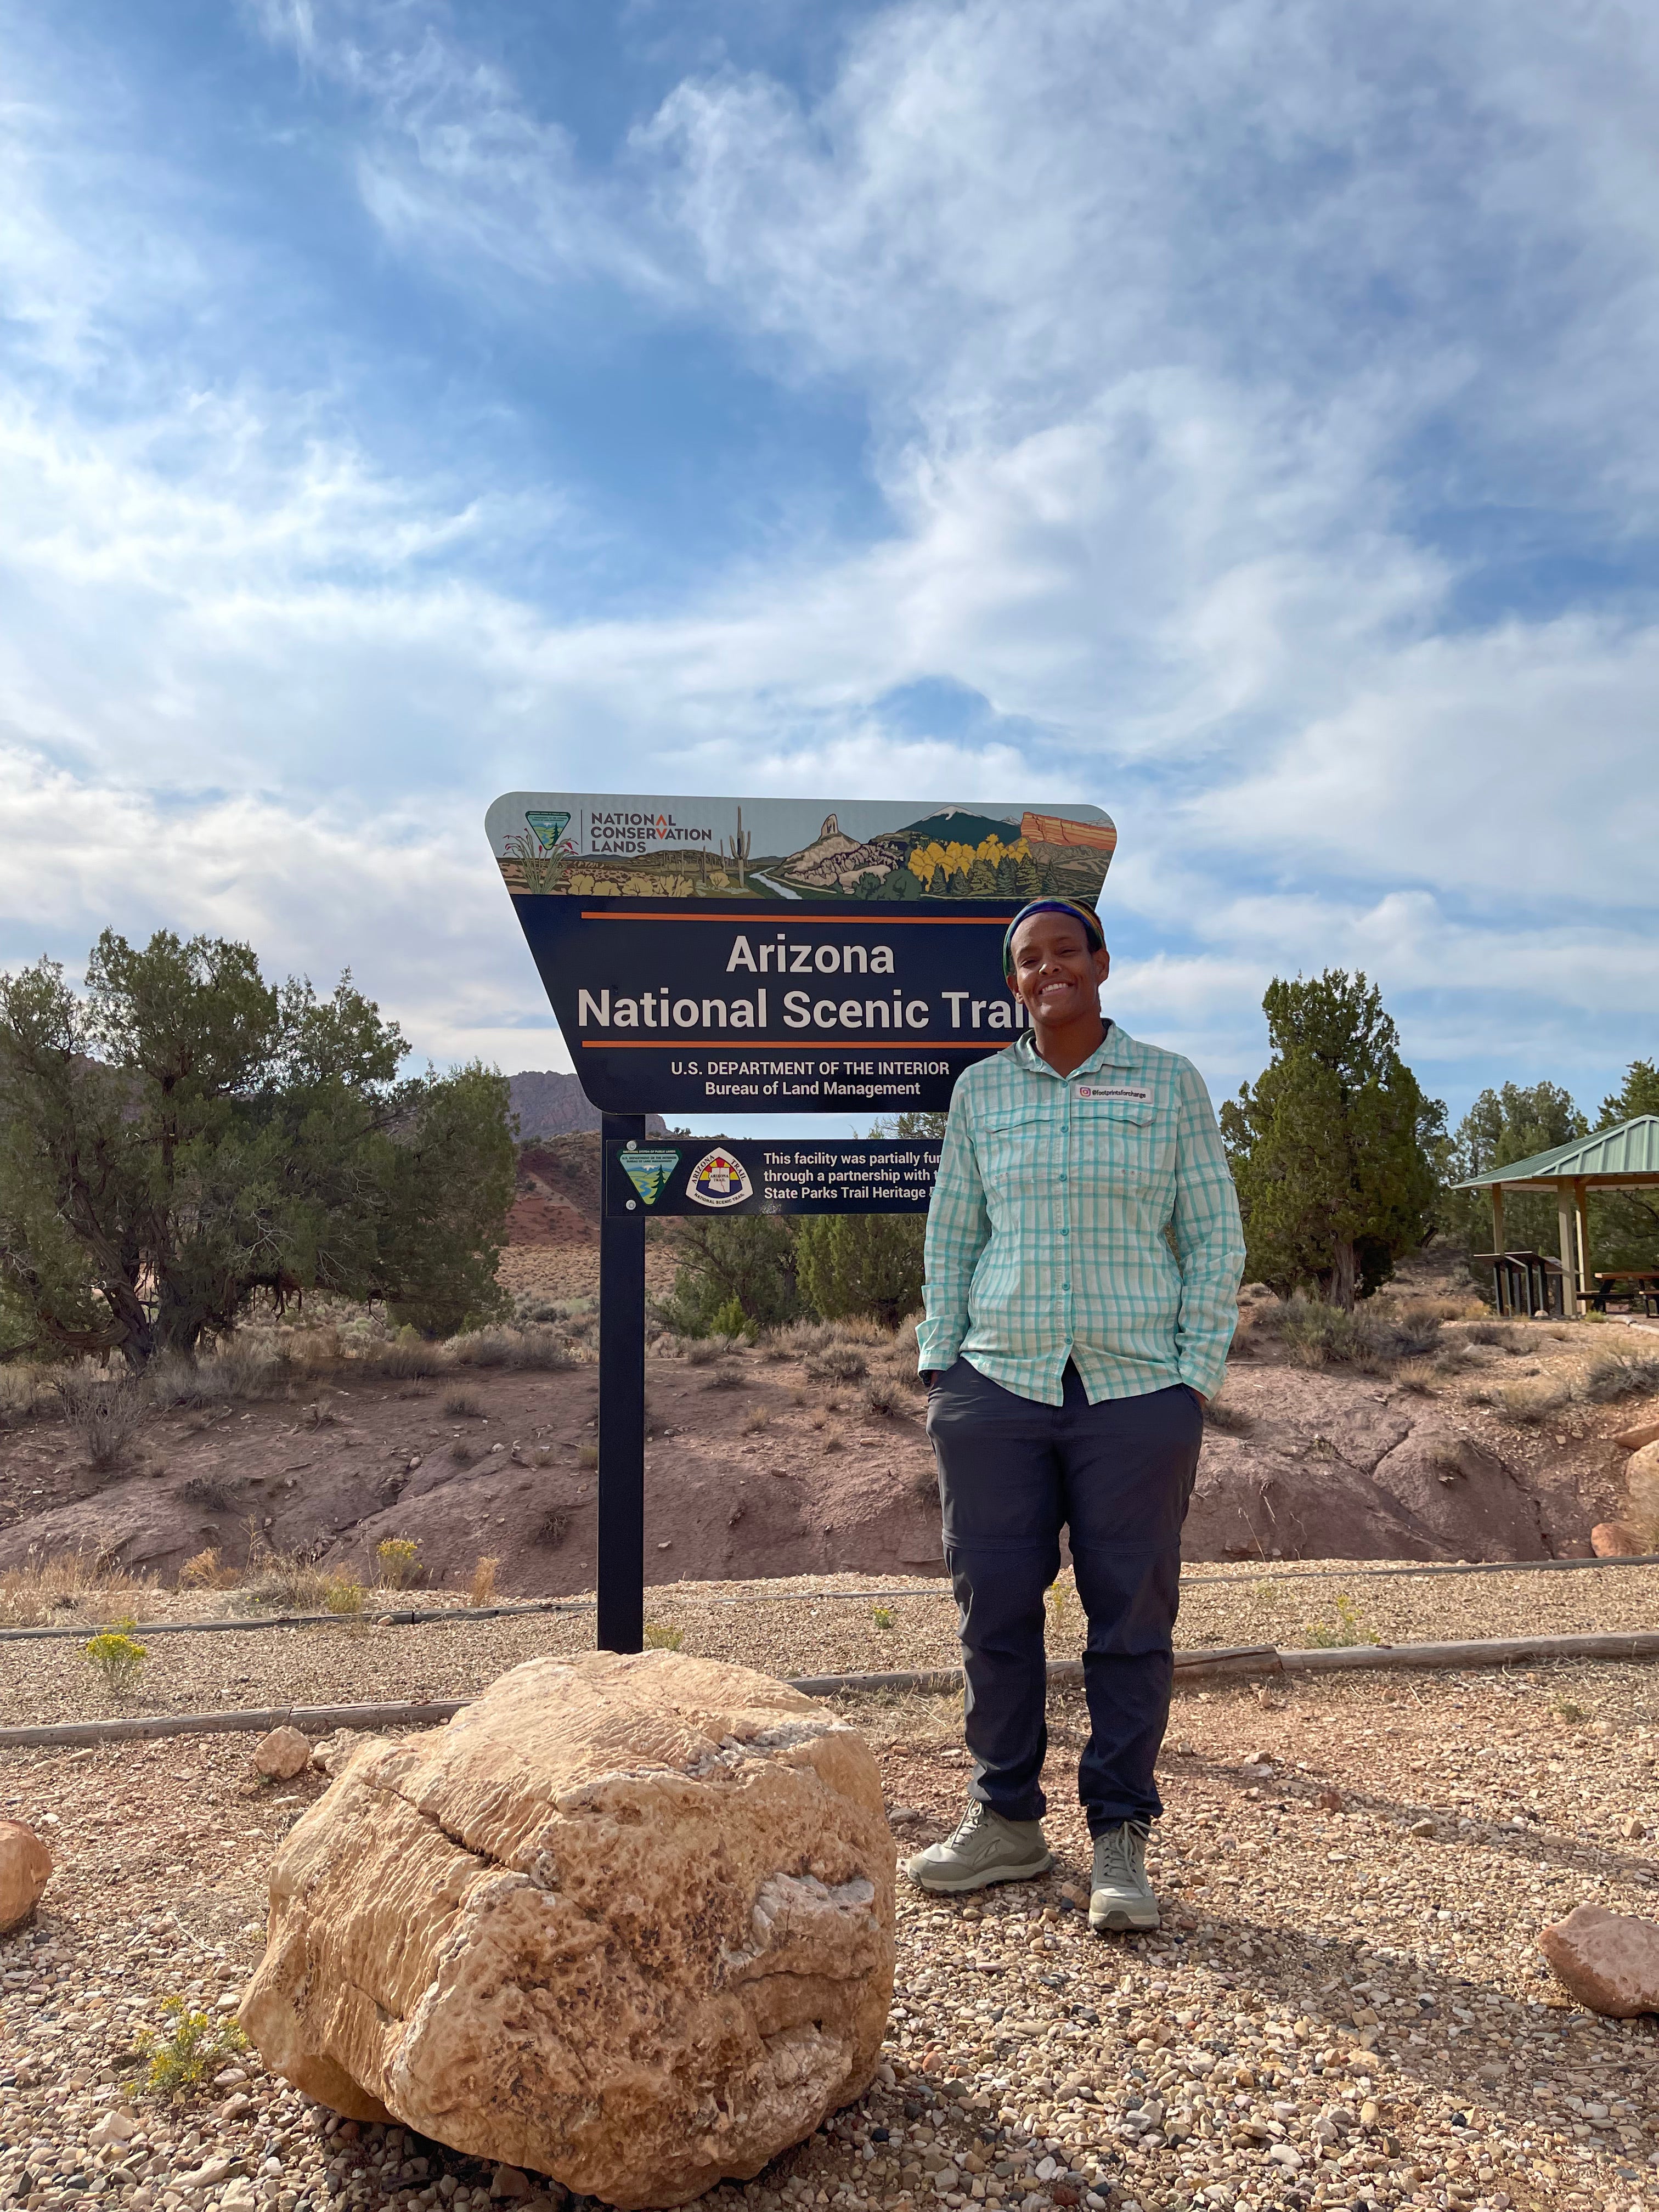 The Great Western Loop – Arizona National Scenic Trail (AZT) Trip Report by Crystal Gail Welcome